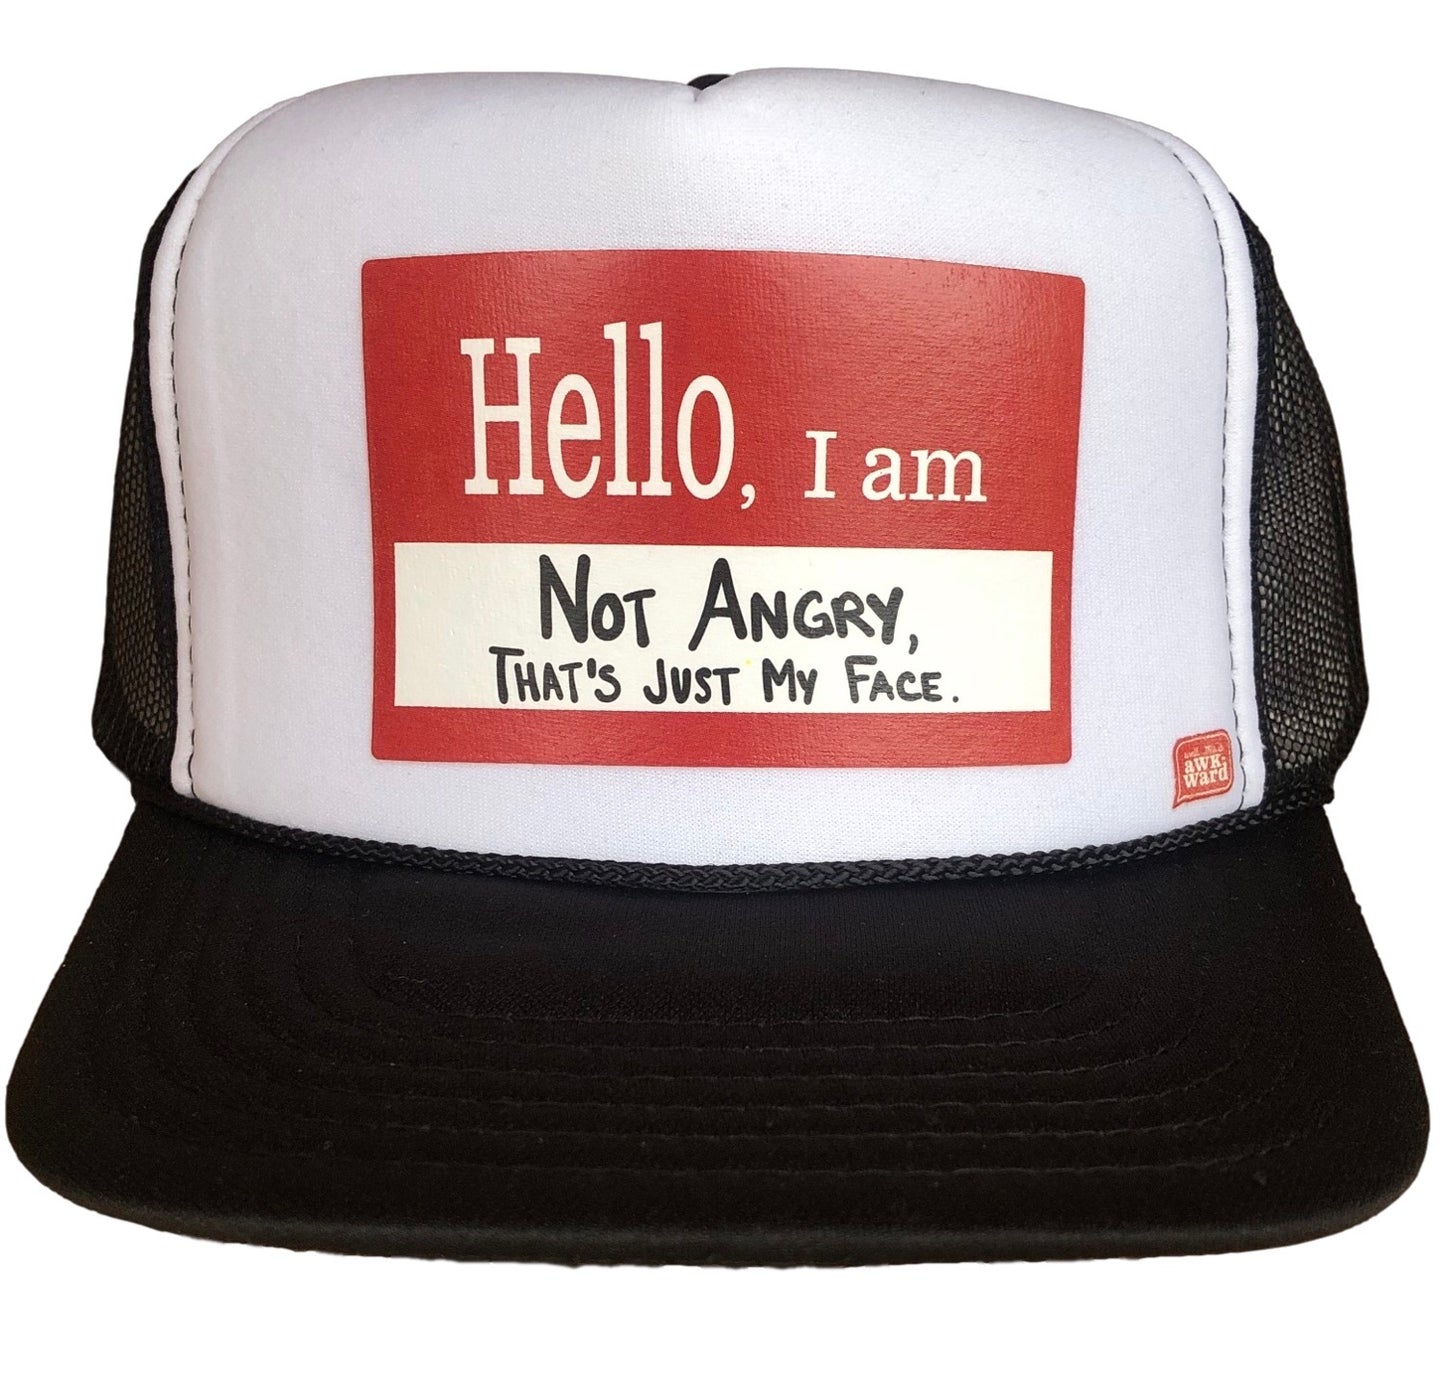 Not Angry Trucker Hat